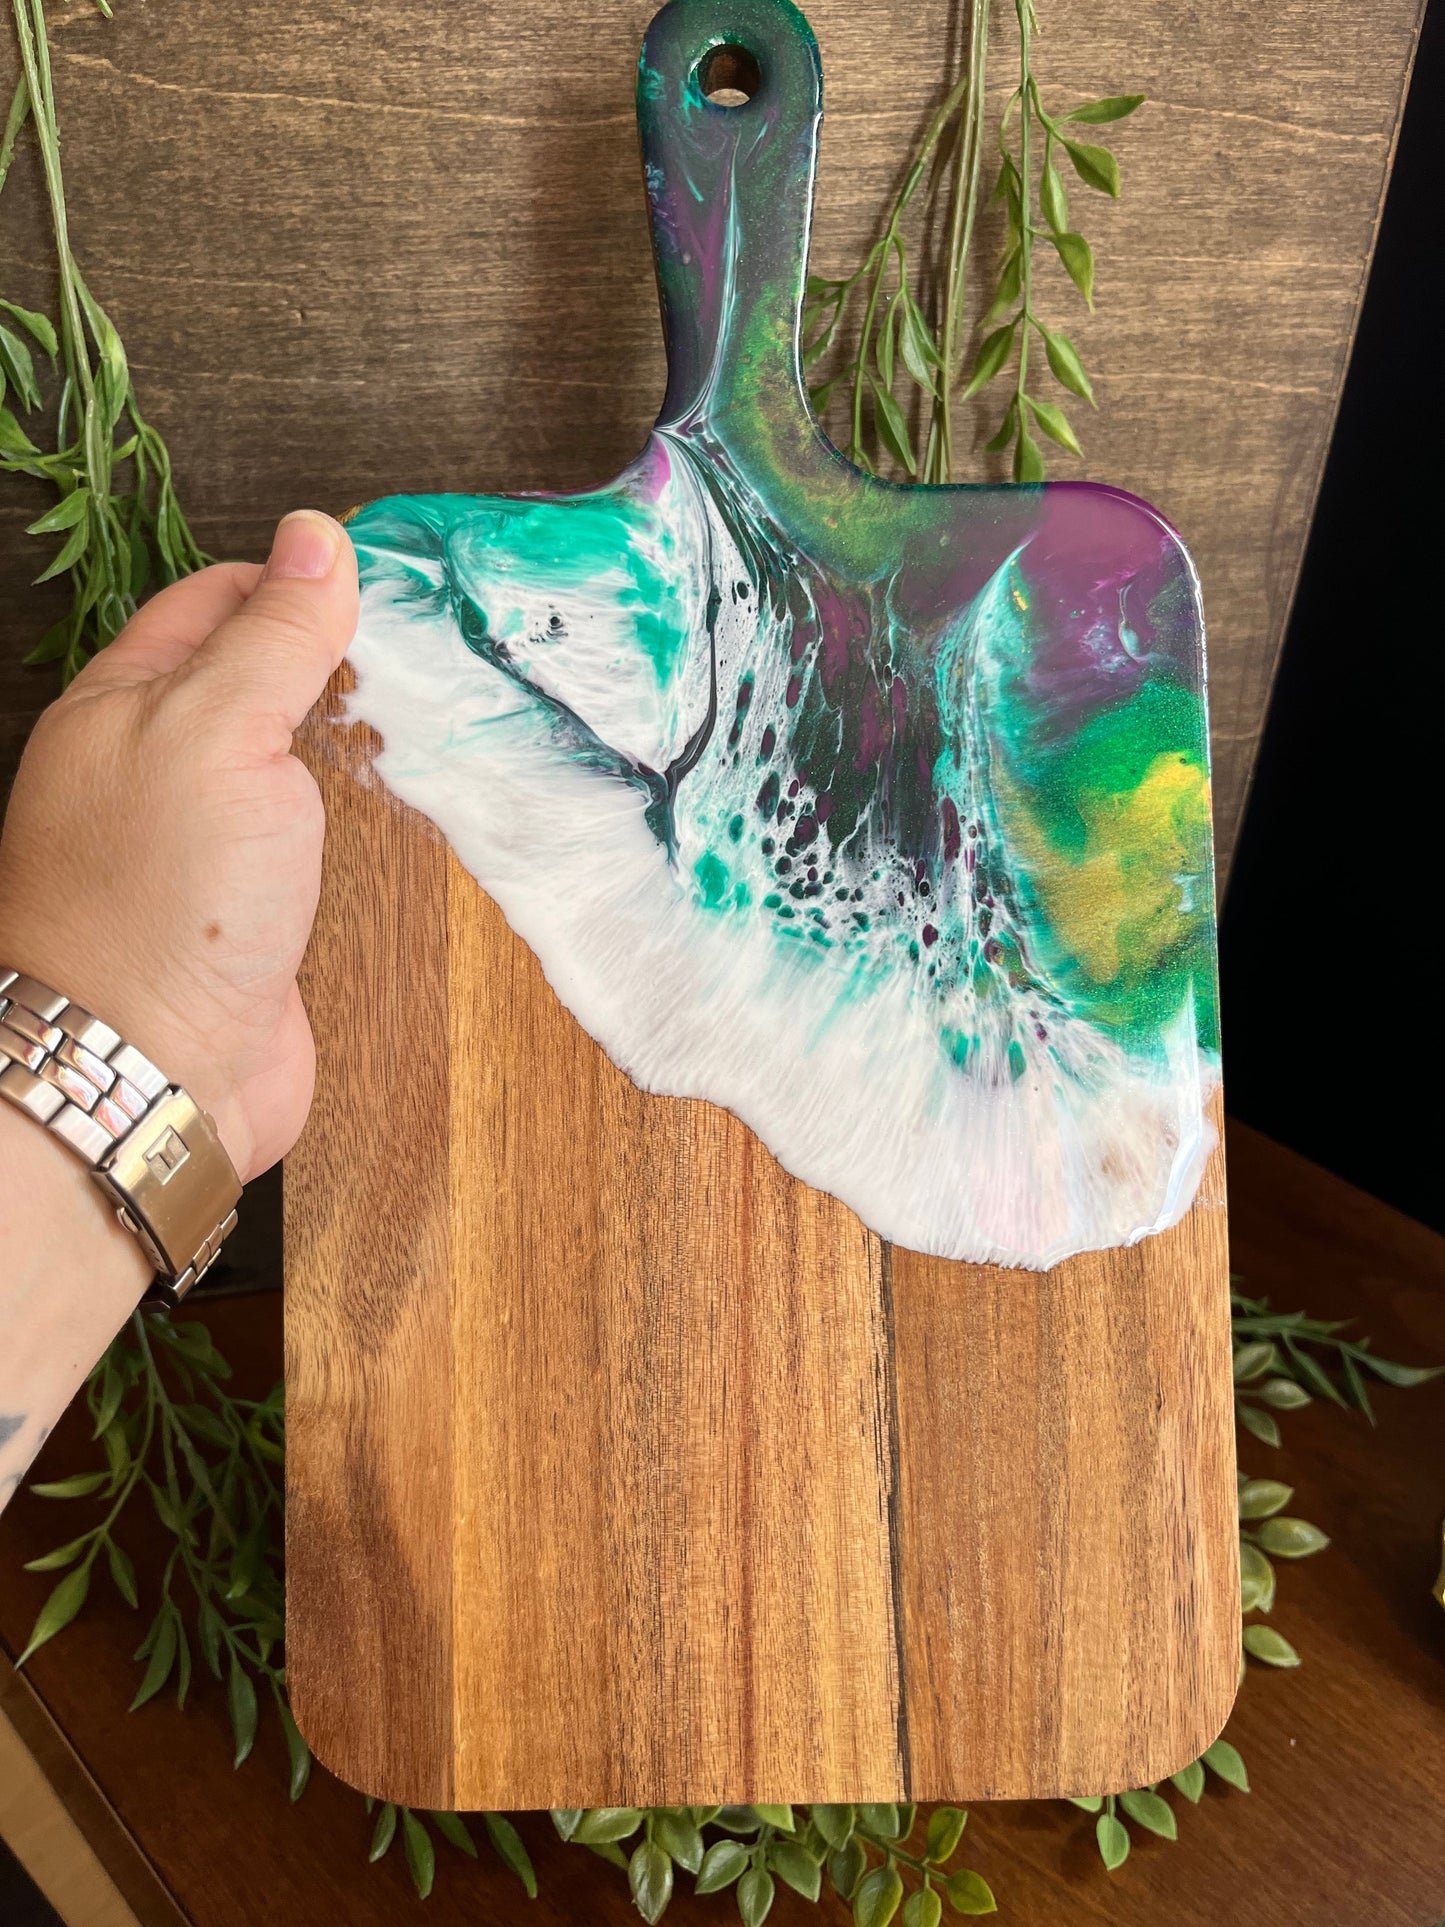 Resin Class - Personal size Cutting board - 3/09 @ 1pm